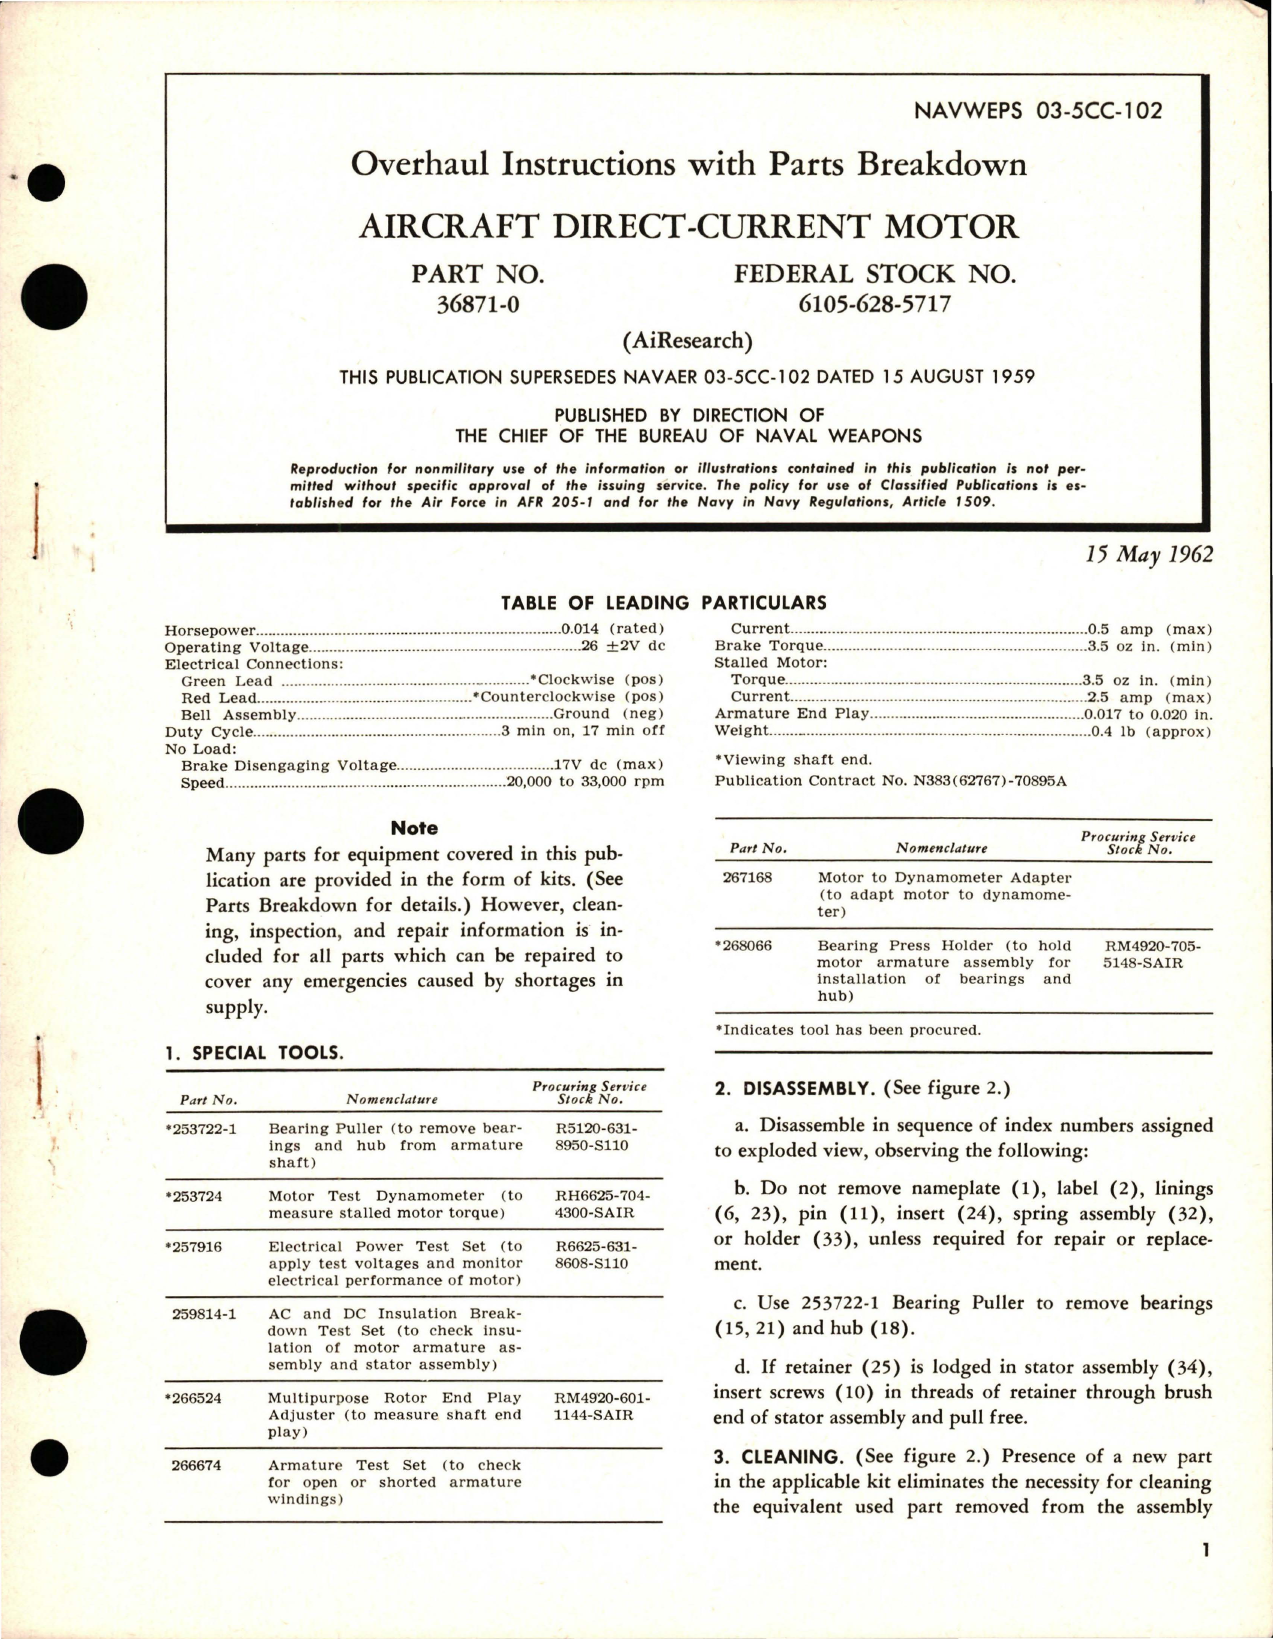 Sample page 1 from AirCorps Library document: Overhaul Instructions with Parts Breakdown for Direct-Current Motor - Part 36871-0 